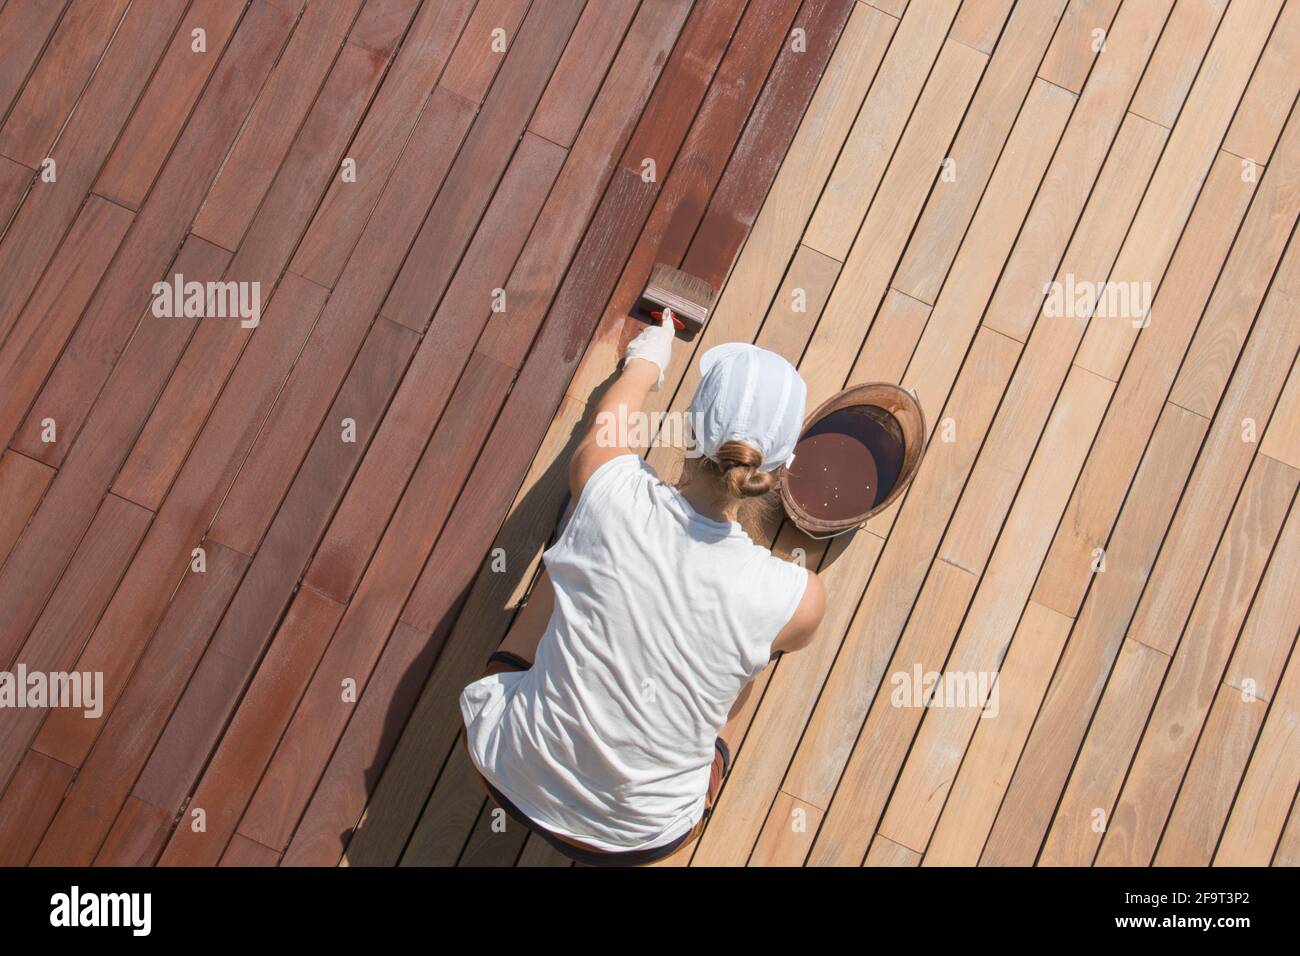 Hardwood deck oiling, decking renovation and nourishing by oil with a brush, overhead view of woman worker renovating wooden terrace Stock Photo